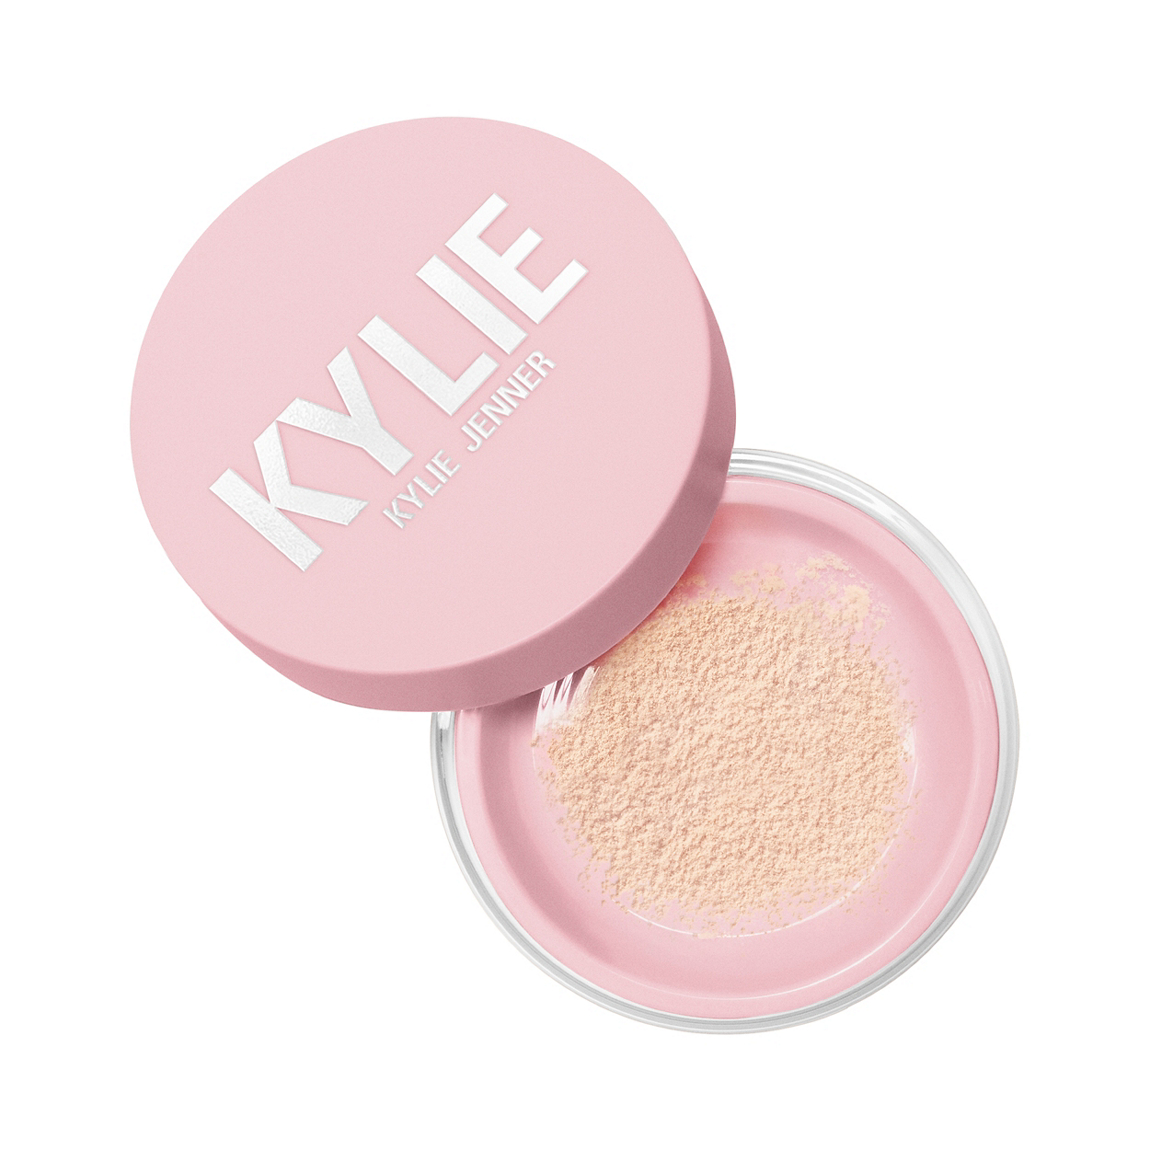 Translucent Setting Powder | Kylie Cosmetics by Kylie Jenner